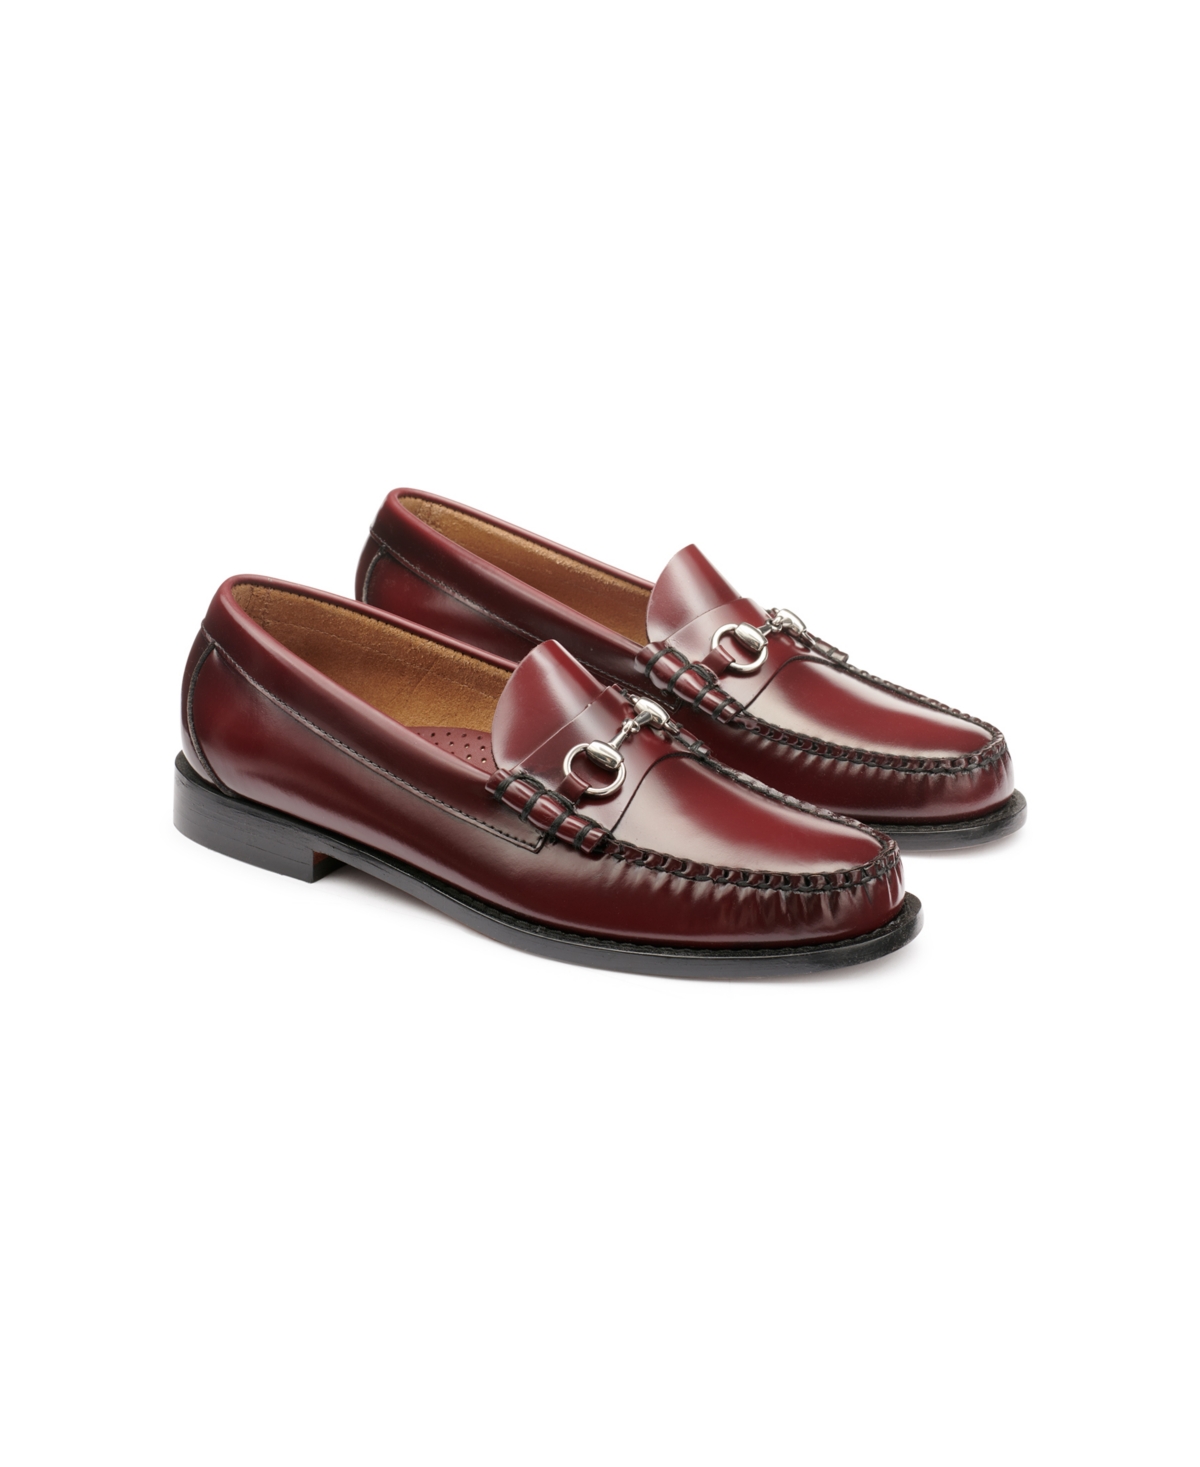 G.h.bass Men's Lincoln Weejuns Bit Loafers - Wine